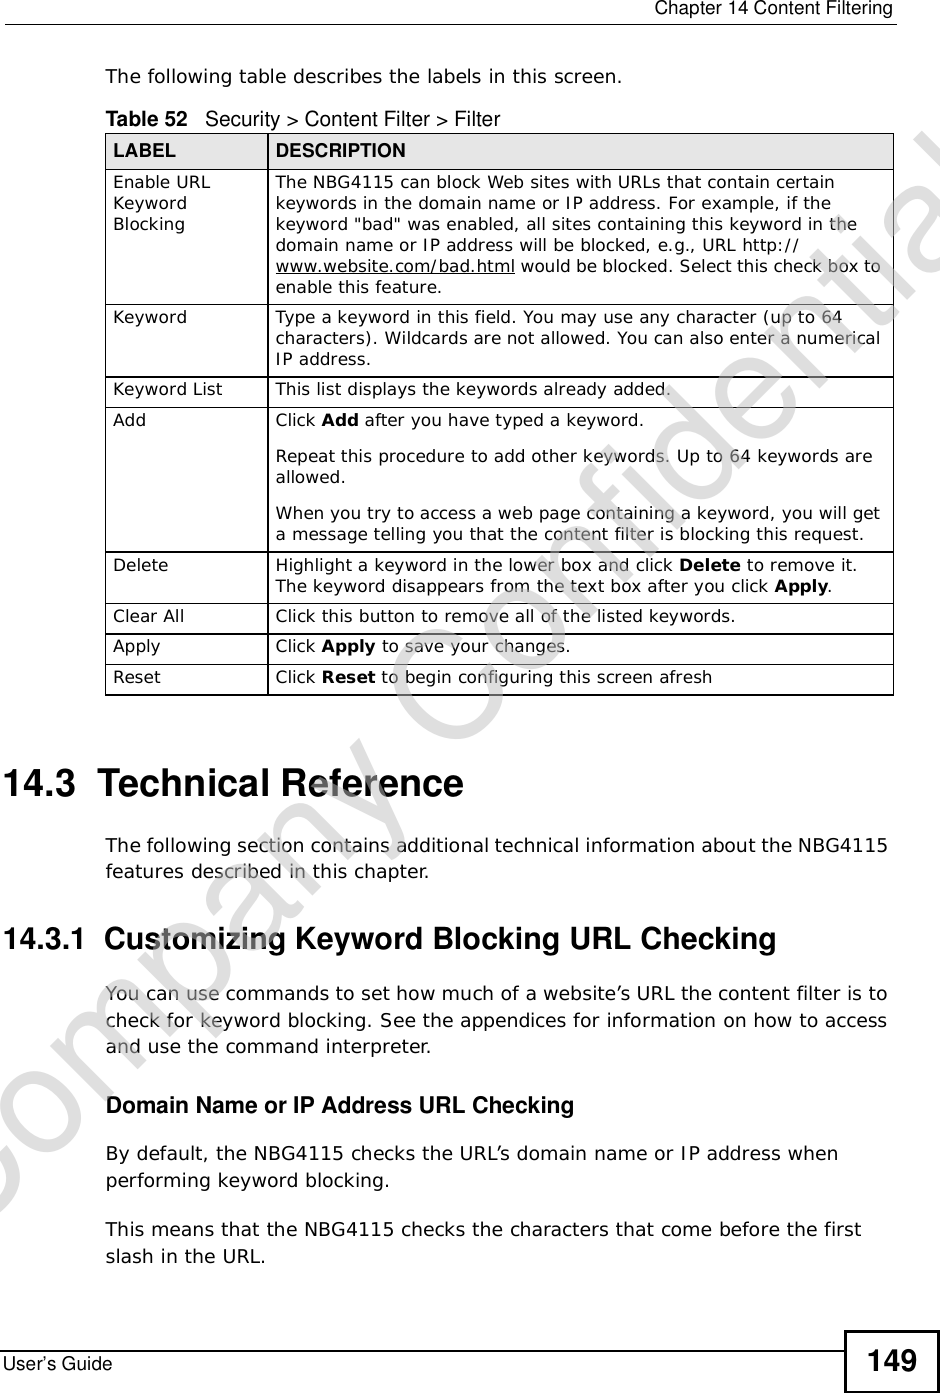  Chapter 14Content FilteringUser’s Guide 149The following table describes the labels in this screen.14.3  Technical ReferenceThe following section contains additional technical information about the NBG4115 features described in this chapter.14.3.1  Customizing Keyword Blocking URL CheckingYou can use commands to set how much of a website’s URL the content filter is to check for keyword blocking. See the appendices for information on how to access and use the command interpreter.Domain Name or IP Address URL CheckingBy default, the NBG4115 checks the URL’s domain name or IP address when performing keyword blocking.This means that the NBG4115 checks the characters that come before the first slash in the URL.Table 52   Security &gt; Content Filter &gt; FilterLABEL DESCRIPTIONEnable URL Keyword BlockingThe NBG4115 can block Web sites with URLs that contain certain keywords in the domain name or IP address. For example, if the keyword &quot;bad&quot; was enabled, all sites containing this keyword in the domain name or IP address will be blocked, e.g., URL http://www.website.com/bad.html would be blocked. Select this check box to enable this feature.Keyword Type a keyword in this field. You may use any character (up to 64 characters). Wildcards are not allowed. You can also enter a numerical IP address.Keyword List This list displays the keywords already added. Add  Click Add after you have typed a keyword. Repeat this procedure to add other keywords. Up to 64 keywords are allowed.When you try to access a web page containing a keyword, you will get a message telling you that the content filter is blocking this request.Delete Highlight a keyword in the lower box and click Delete to remove it. The keyword disappears from the text box after you click Apply.Clear All Click this button to remove all of the listed keywords.Apply Click Apply to save your changes.Reset Click Reset to begin configuring this screen afreshCompany Confidential